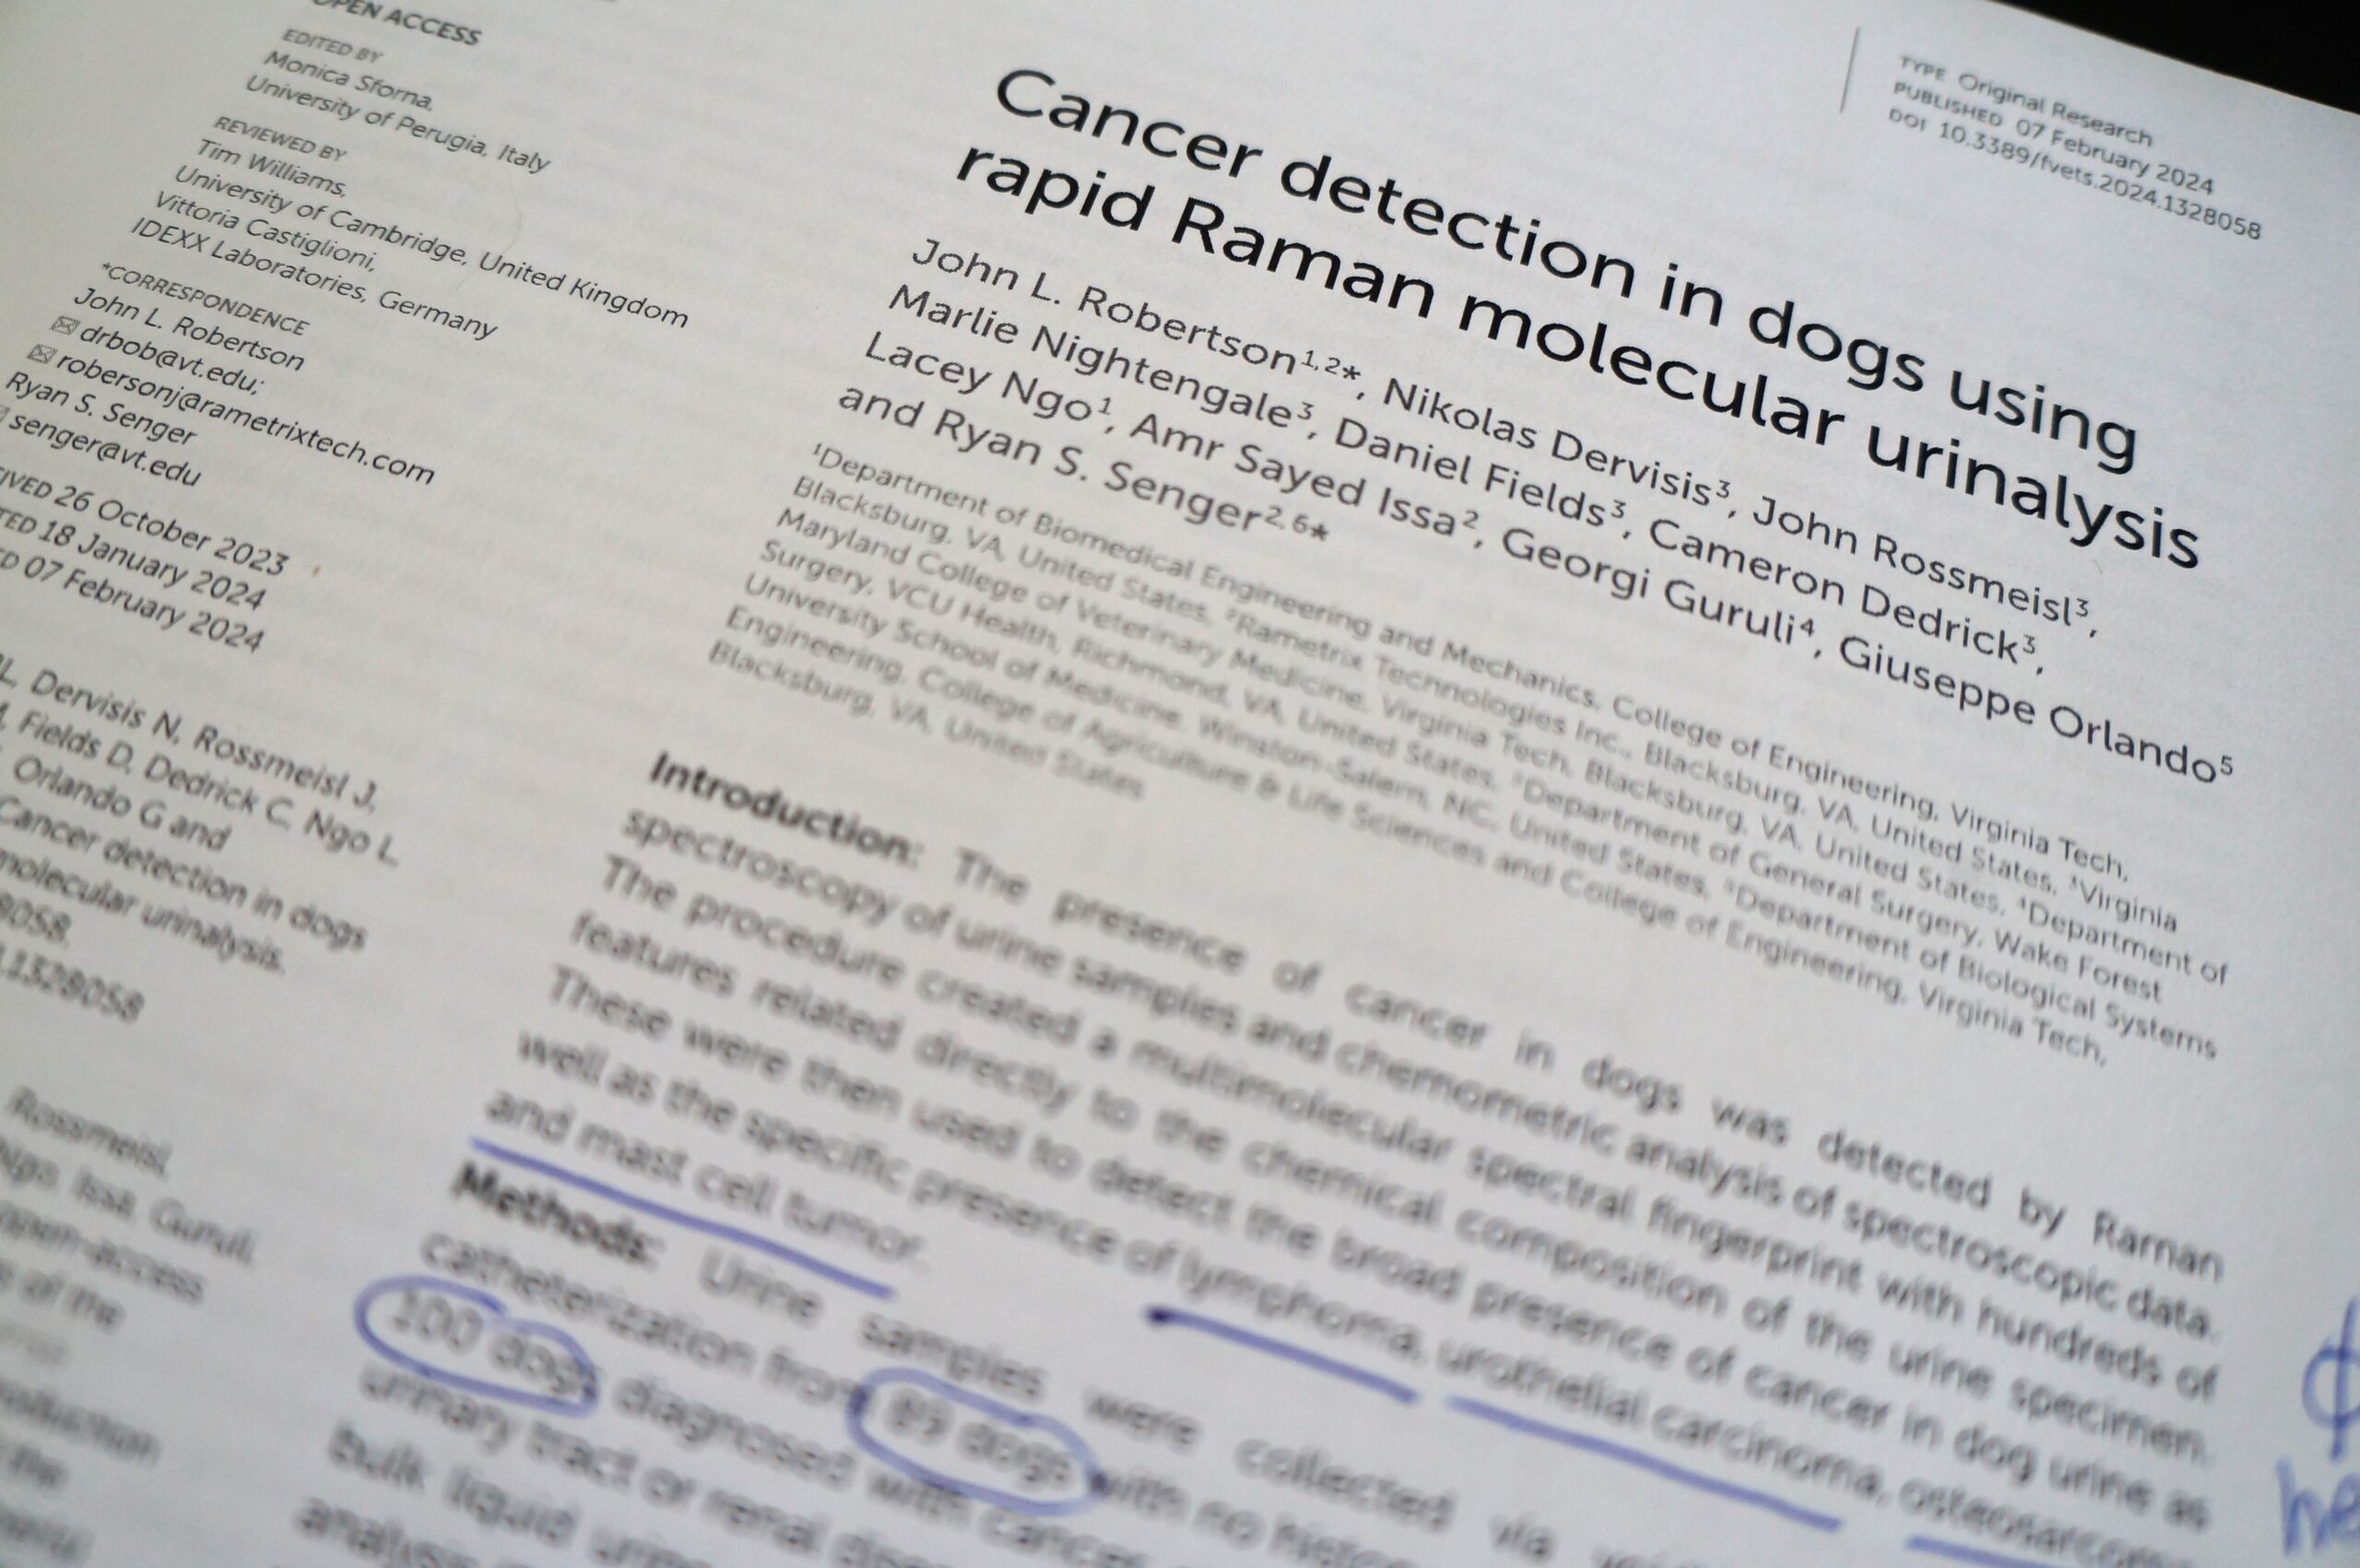 detecting dog cancers photo of the published paper